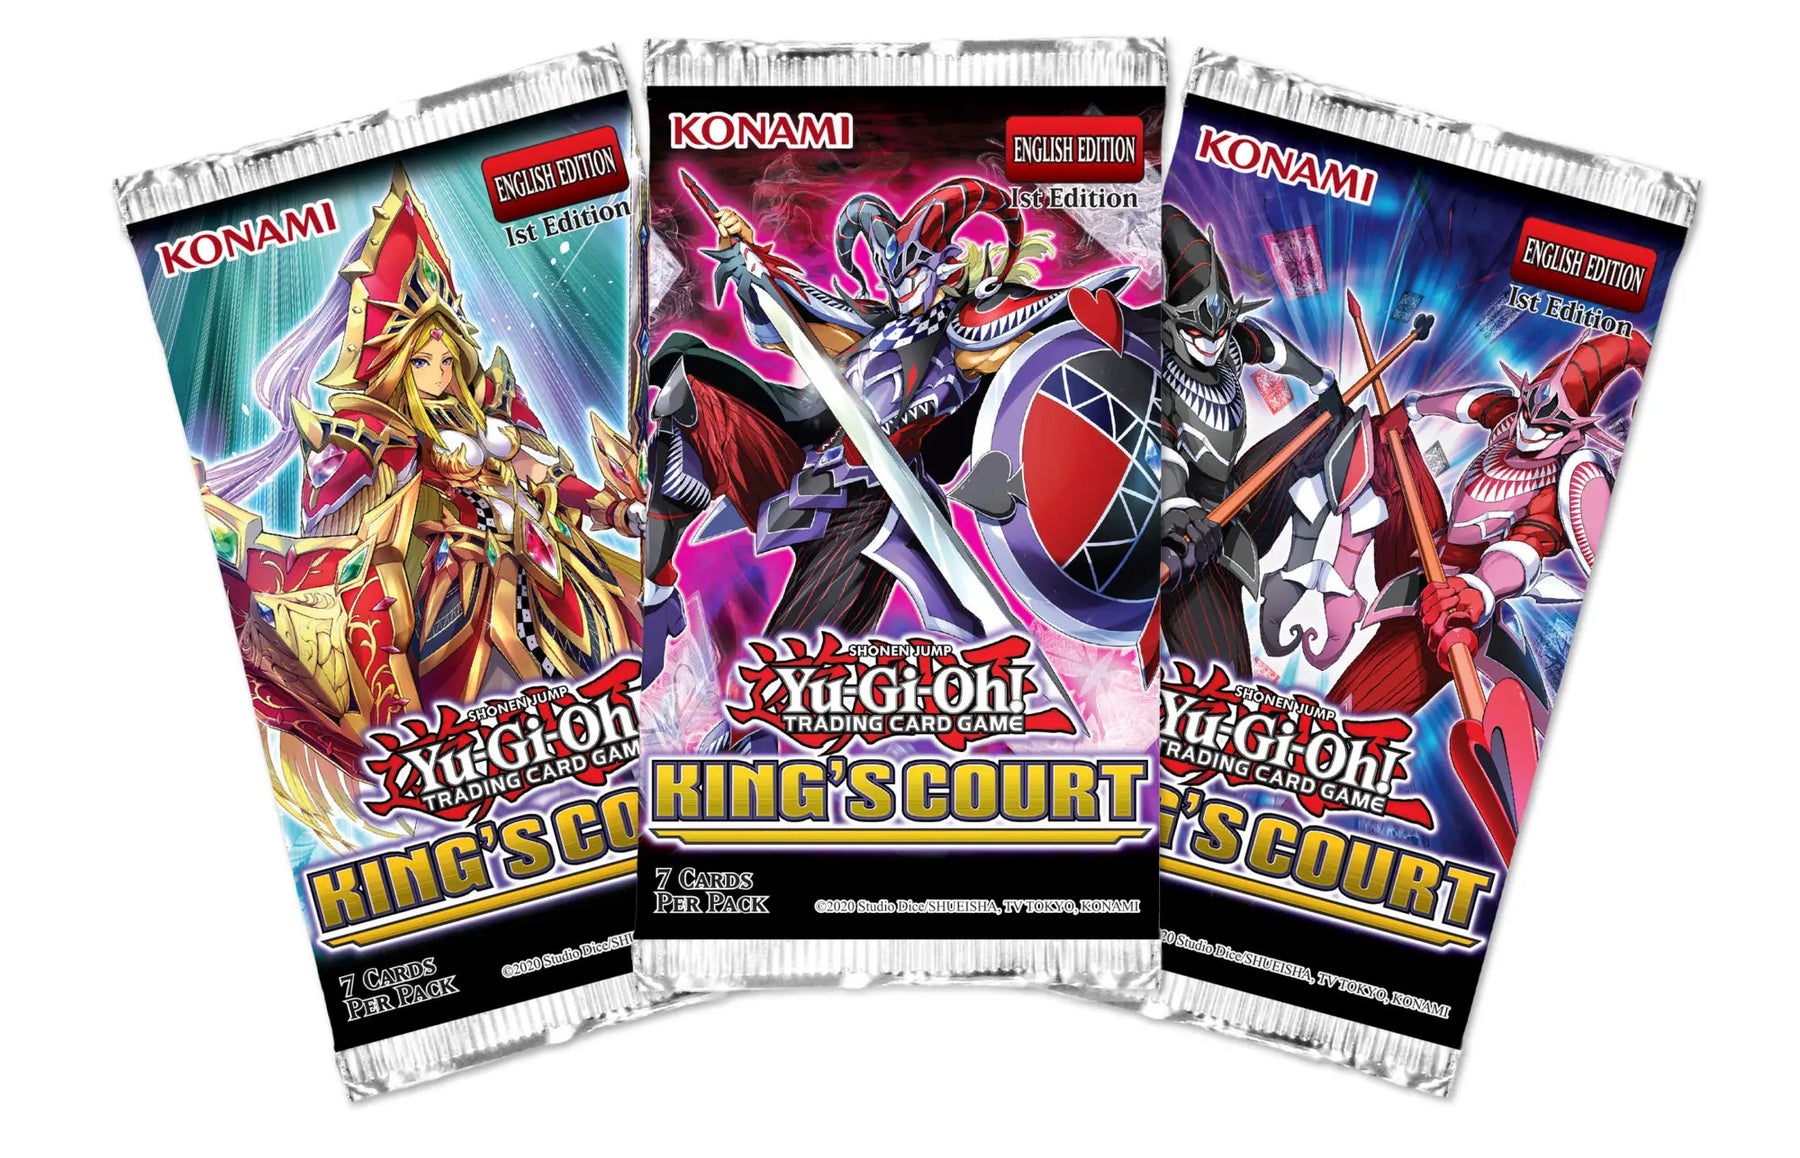 Pre-order Legendary New Yu-Gi-Oh! Cards Right Now!